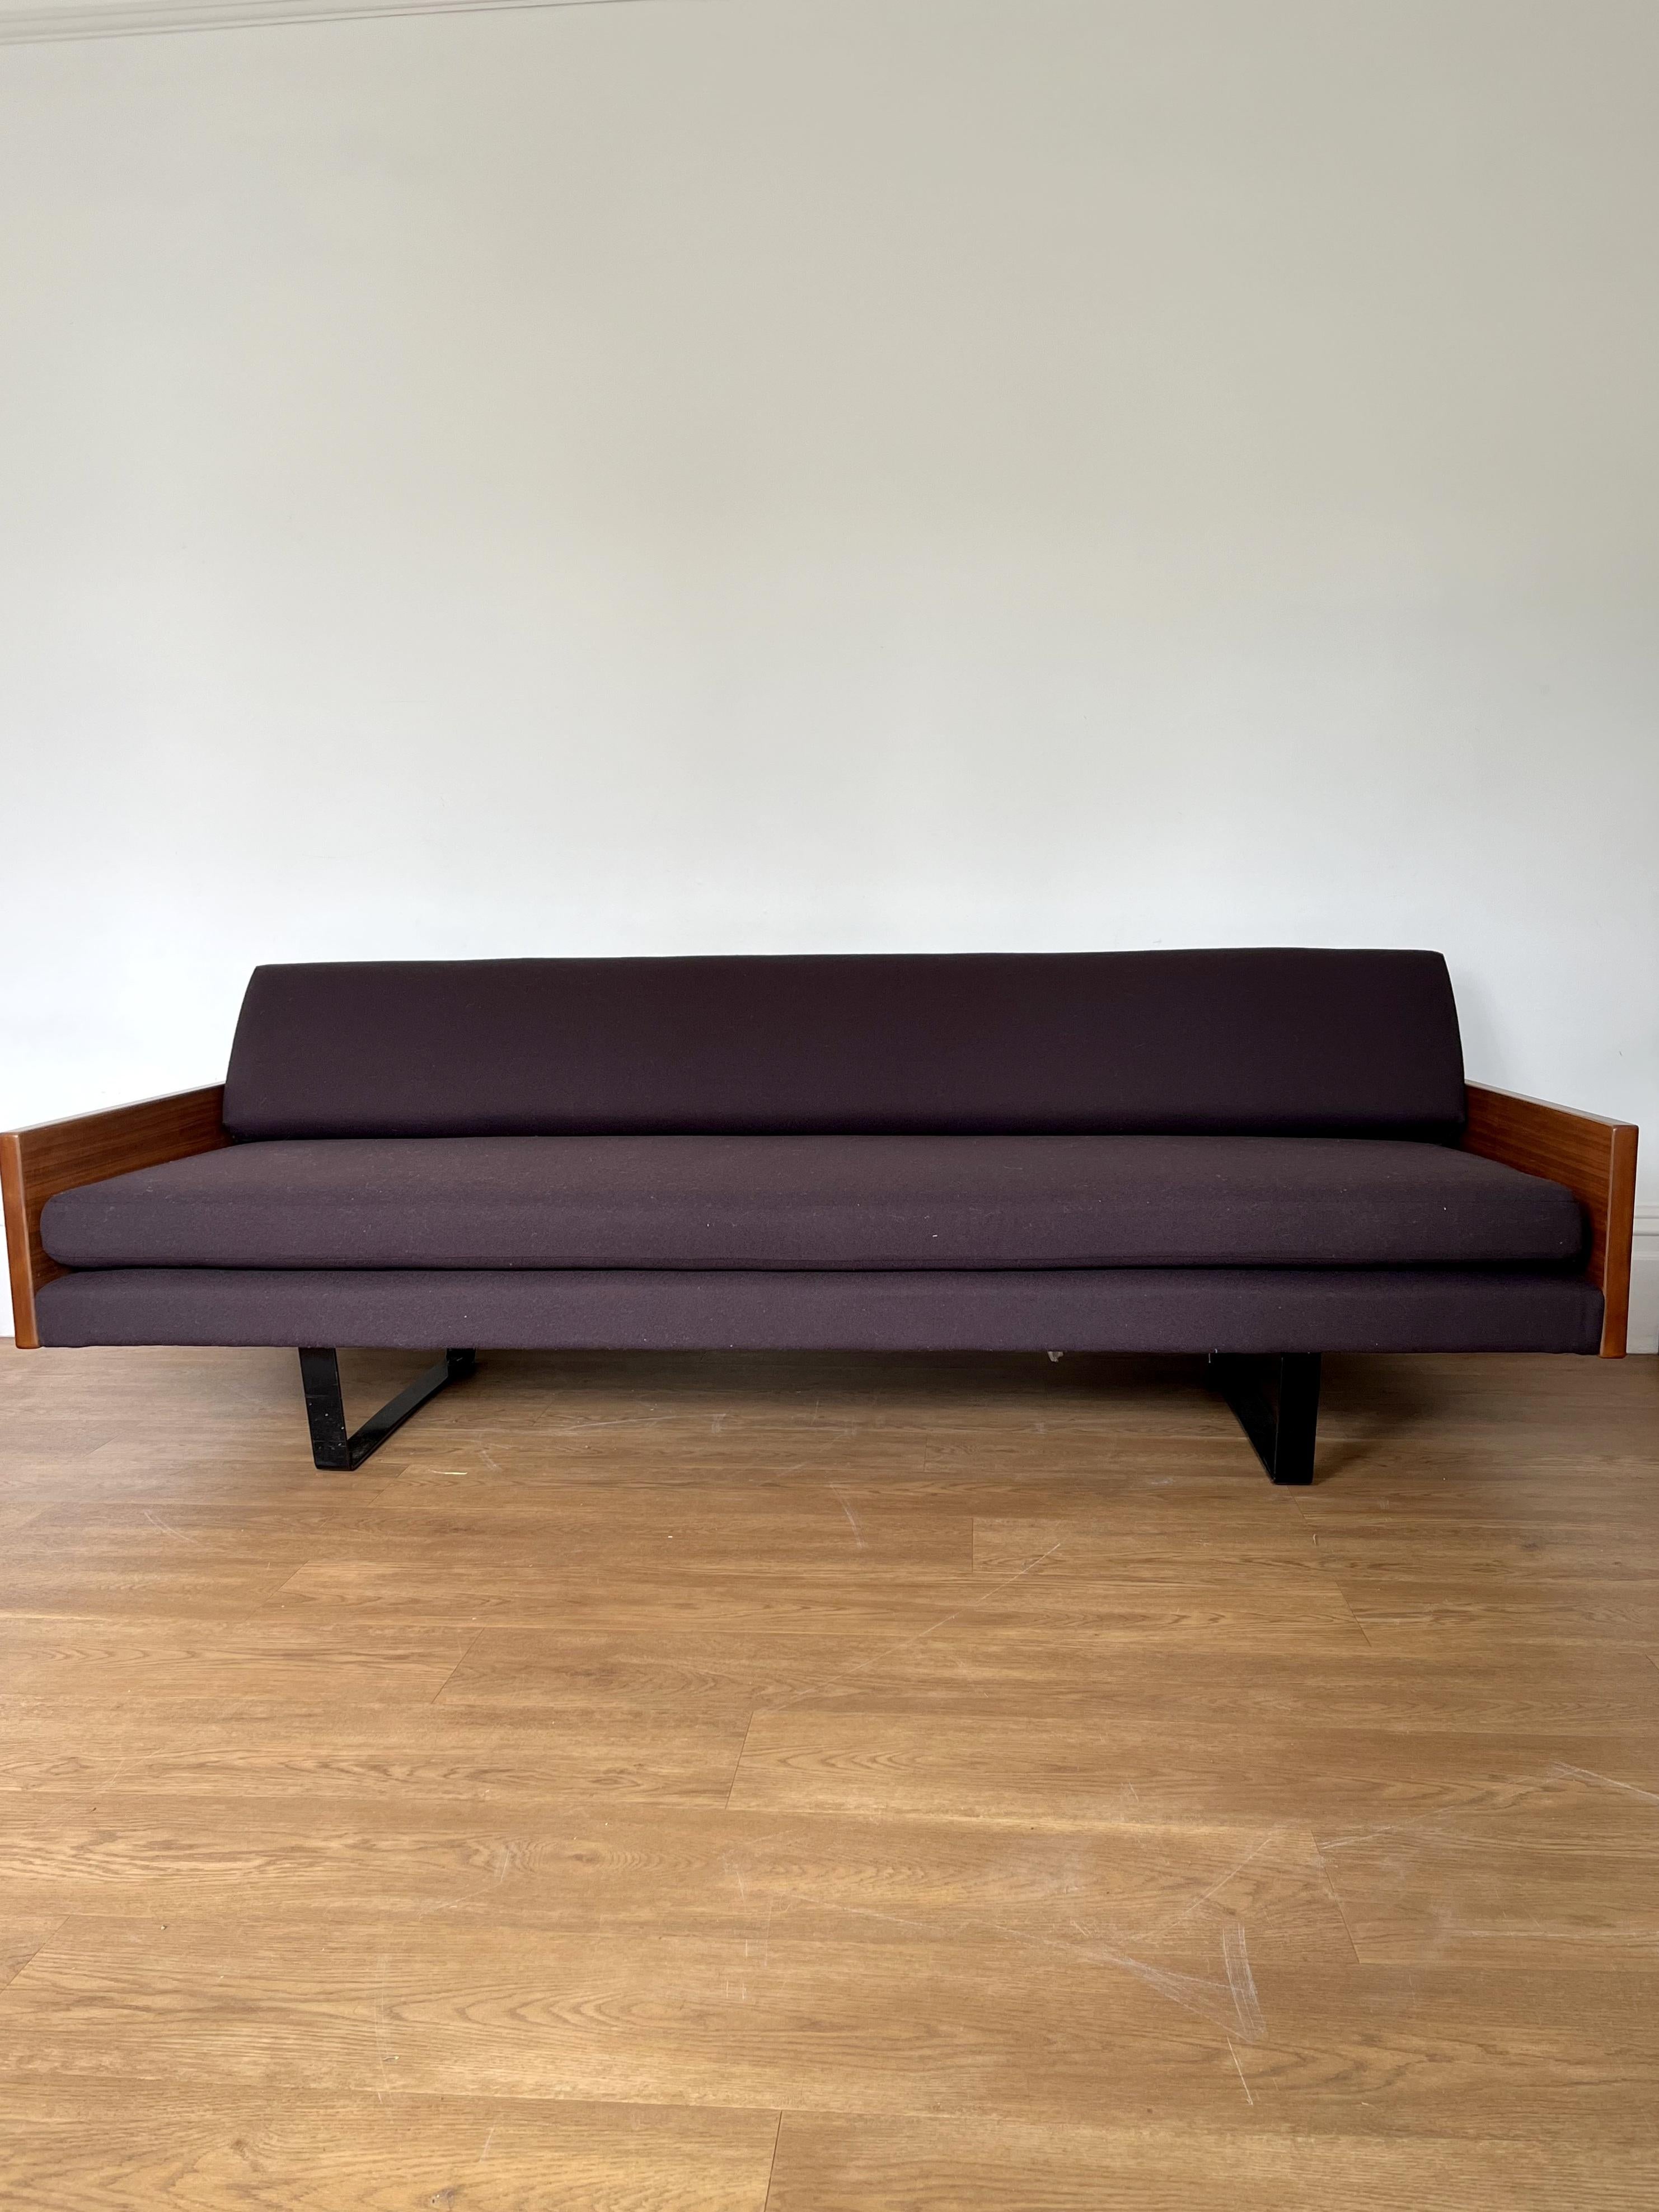 20th Century Robin Day Daybed for Habitat